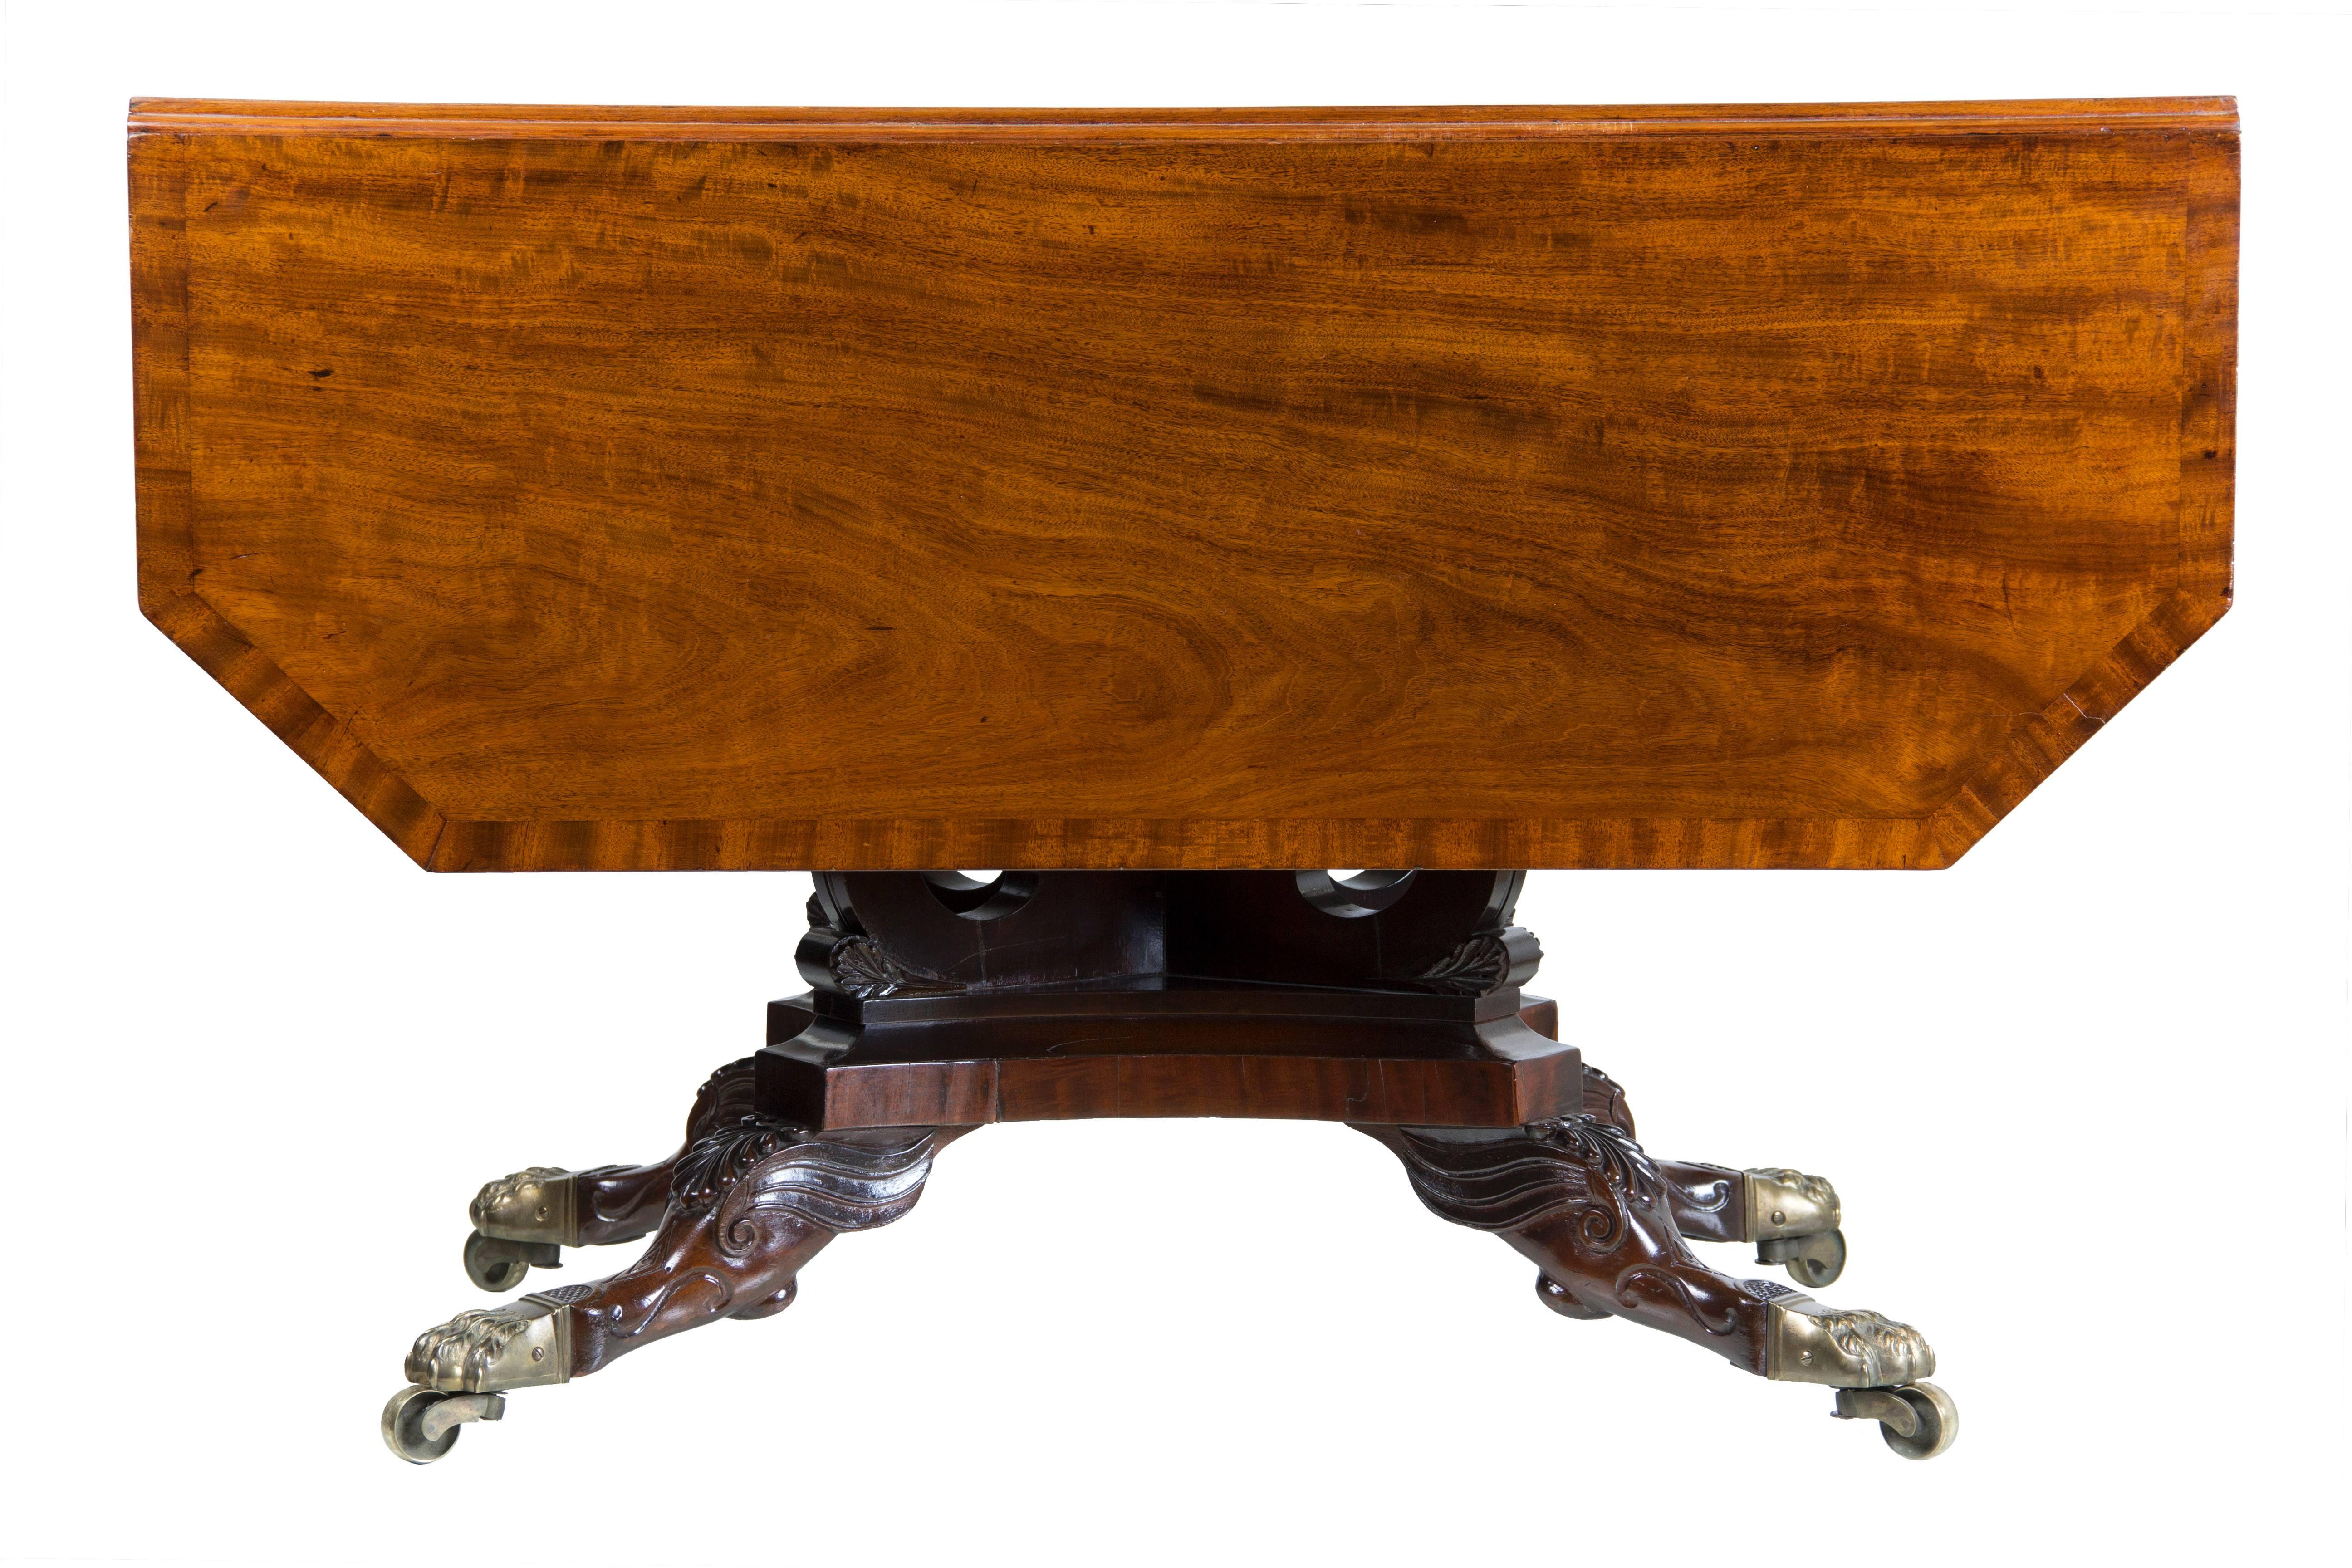 19th Century Mahogany Drop Leaf Table Crossed Lyres Attributed Joseph B. Barry, Phil. PA 1820 For Sale